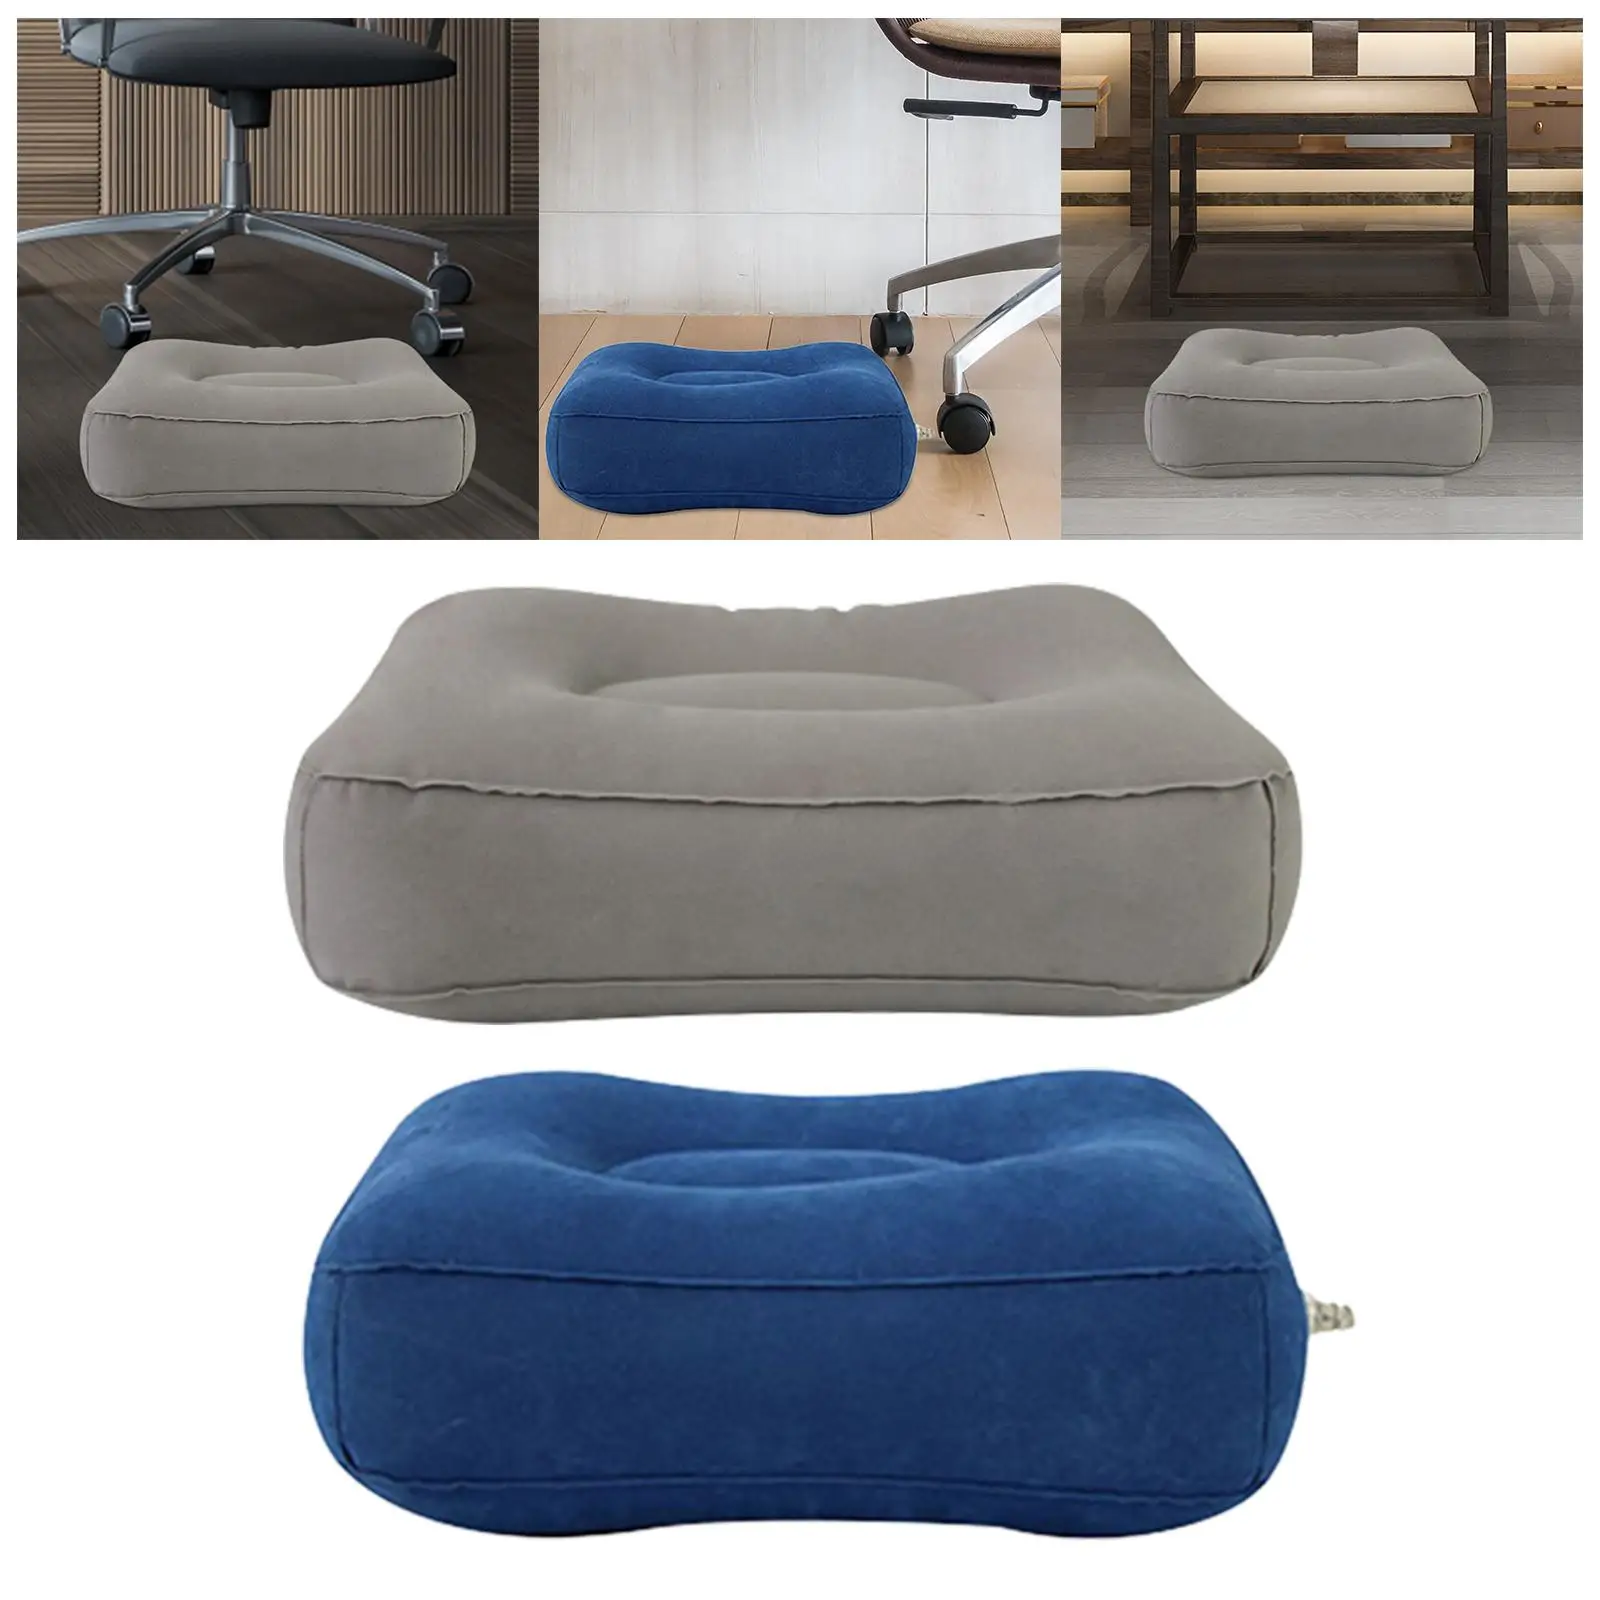 Foot Rest Pillow Foot Rest Cushion Inflatable Foot Rest Mat Inflatable Stool Ottoman for Airplane Camping Mat Train Office Home